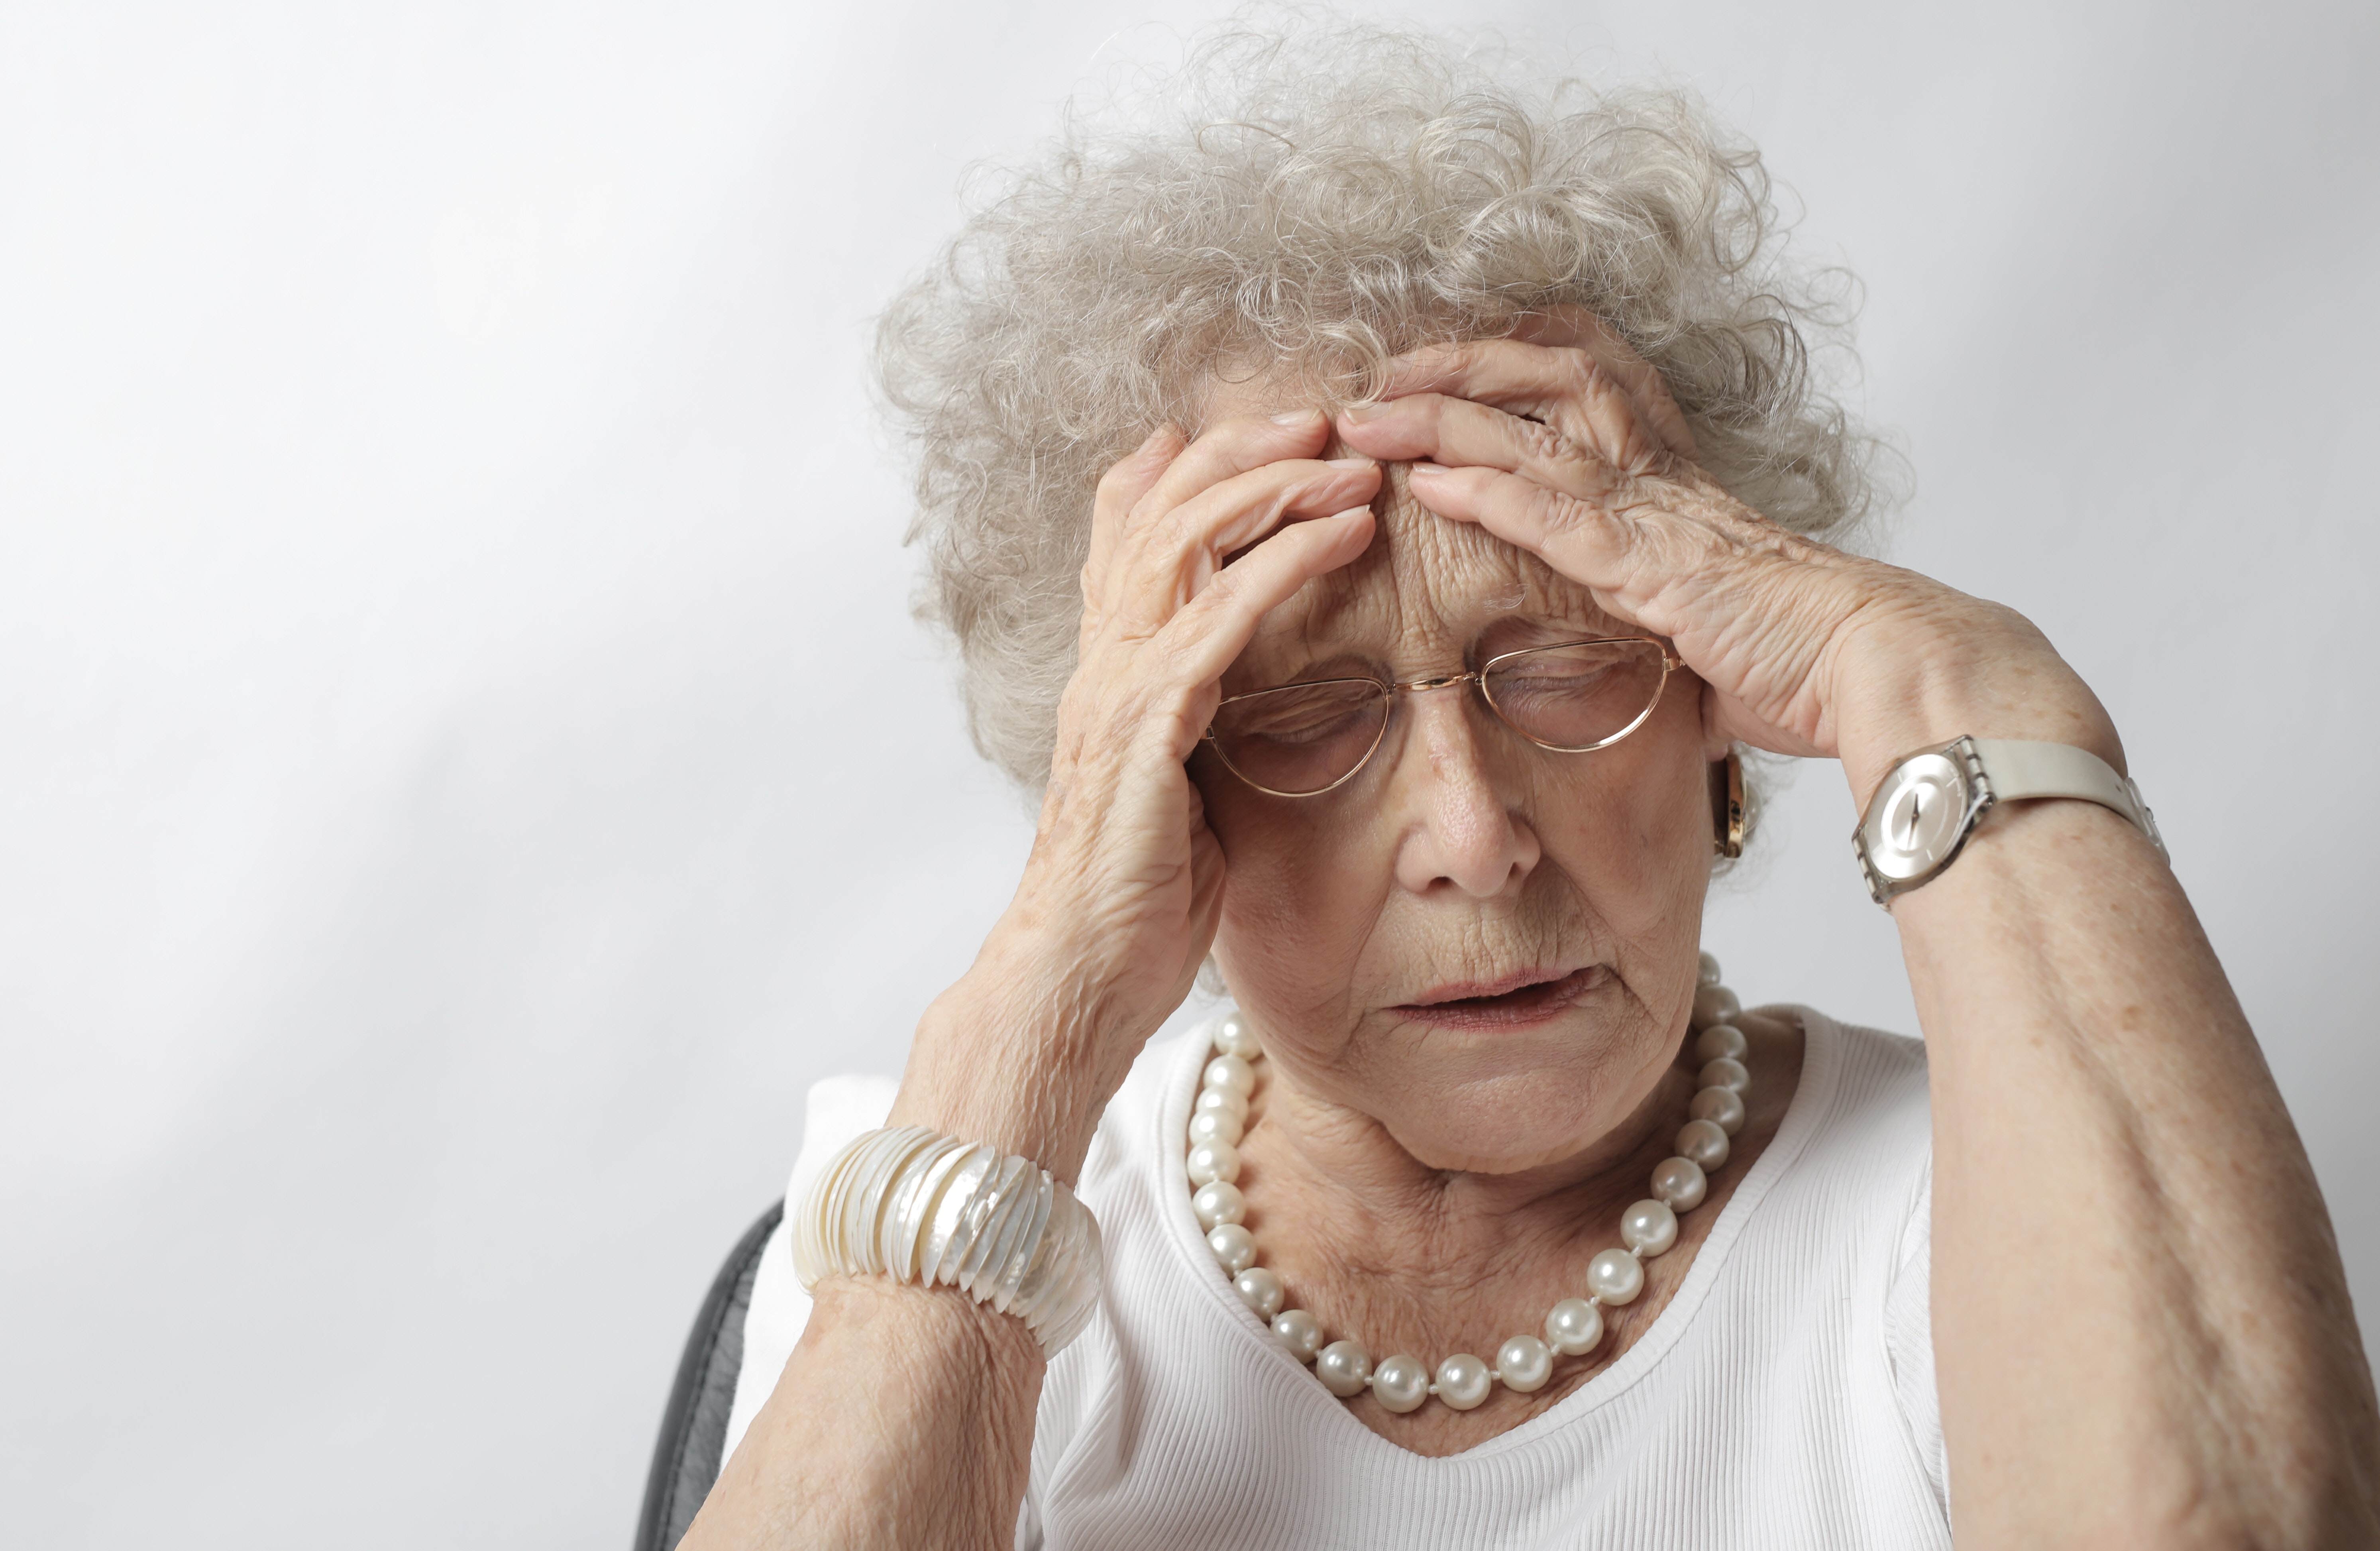 Stressed senior by Photo by Andrea Piacquadio from Pexels